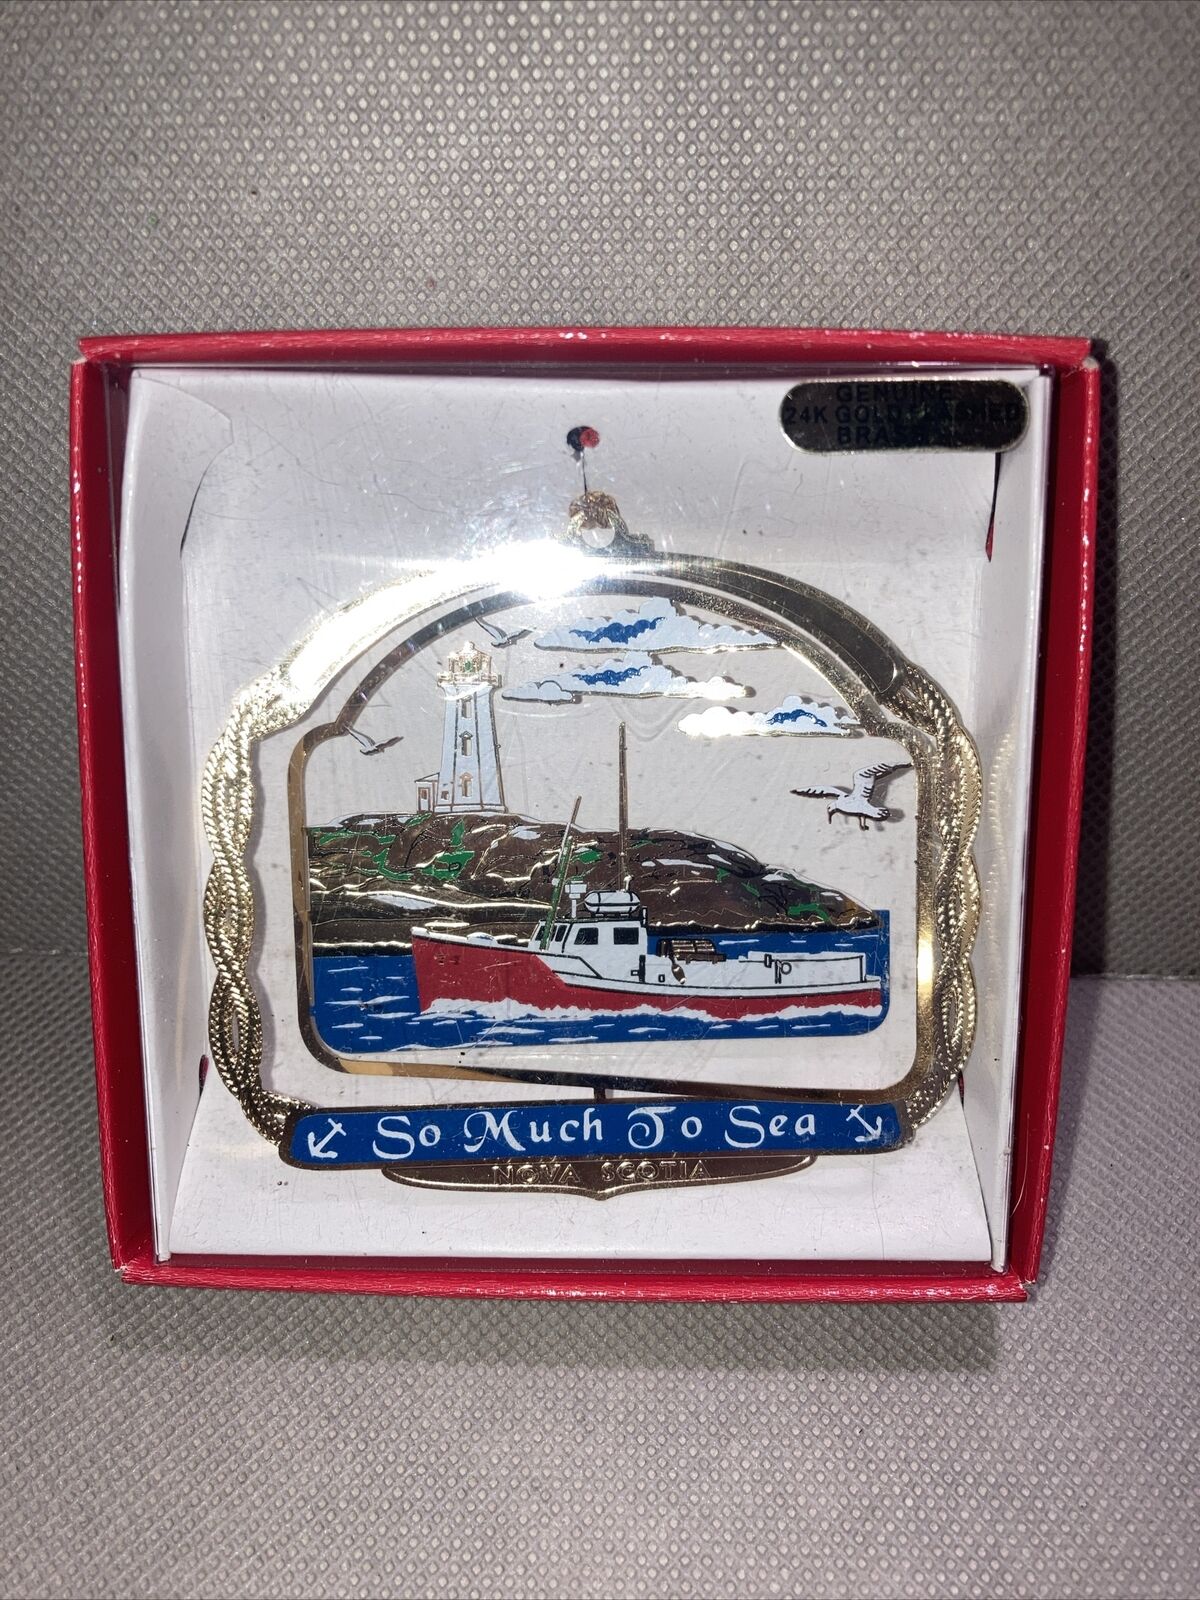 Nation’s Treasures 24K Gold Flashed Brass Nova Scotia Ornament So Much To Sea